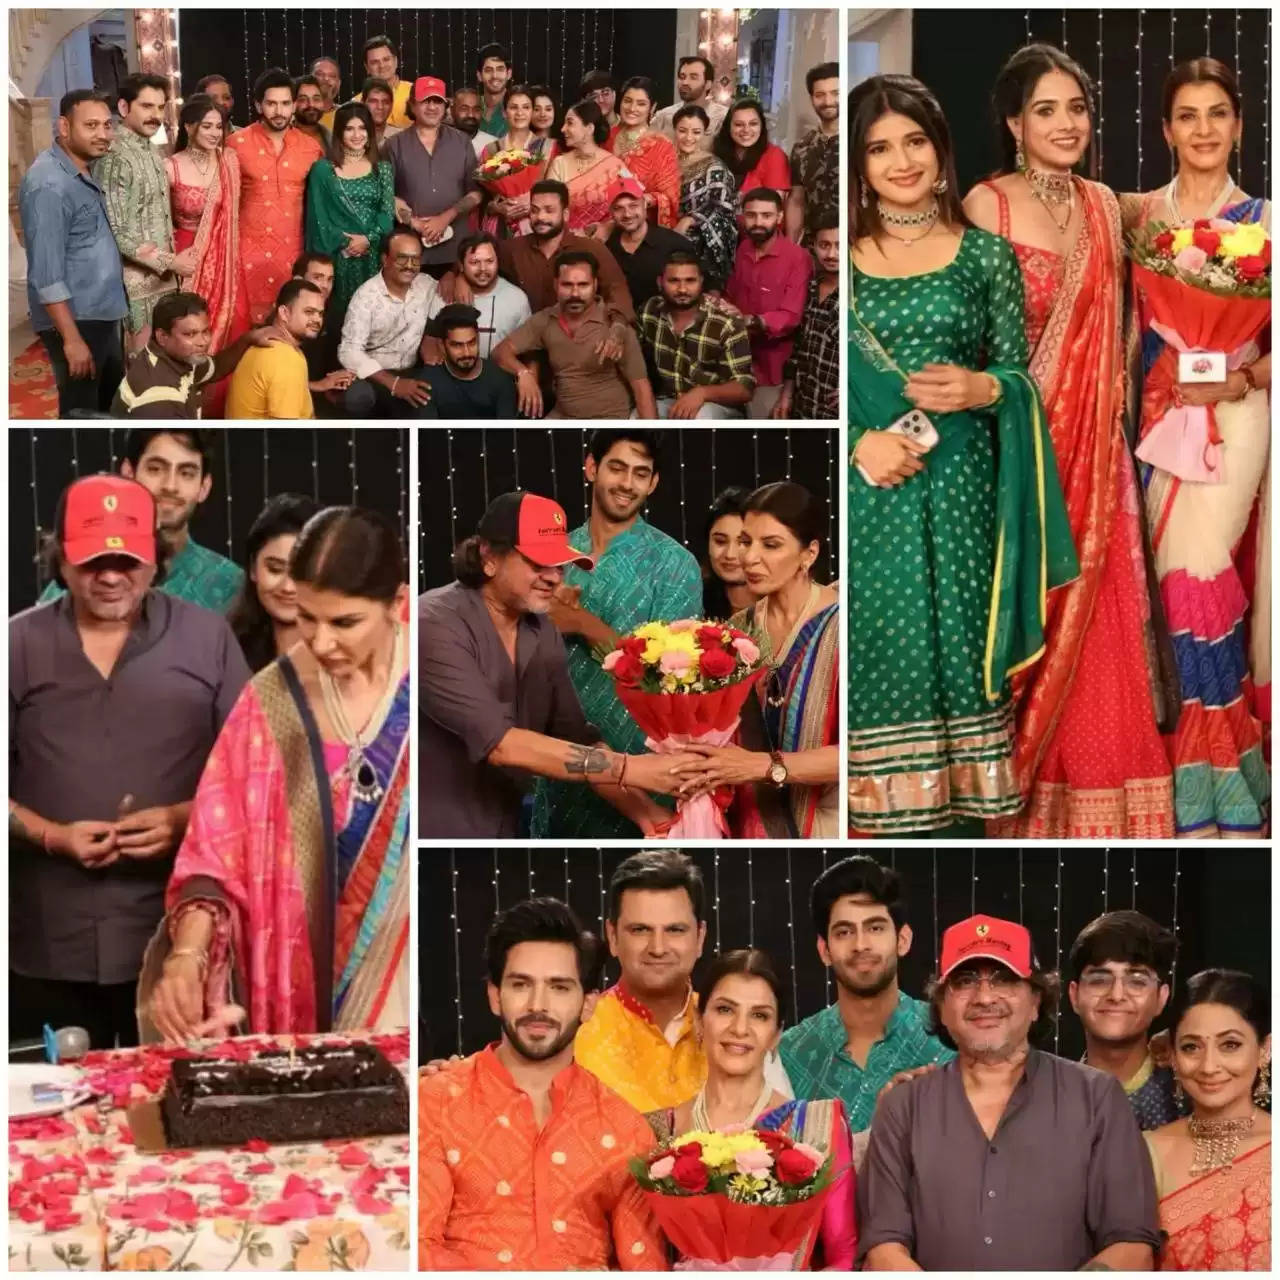 The ambiance on the set of Yeh Rishta Kya Kehlata Hai was really happy and exciting because the cast and crew gathered to celebrate Anita Raj's birthday.